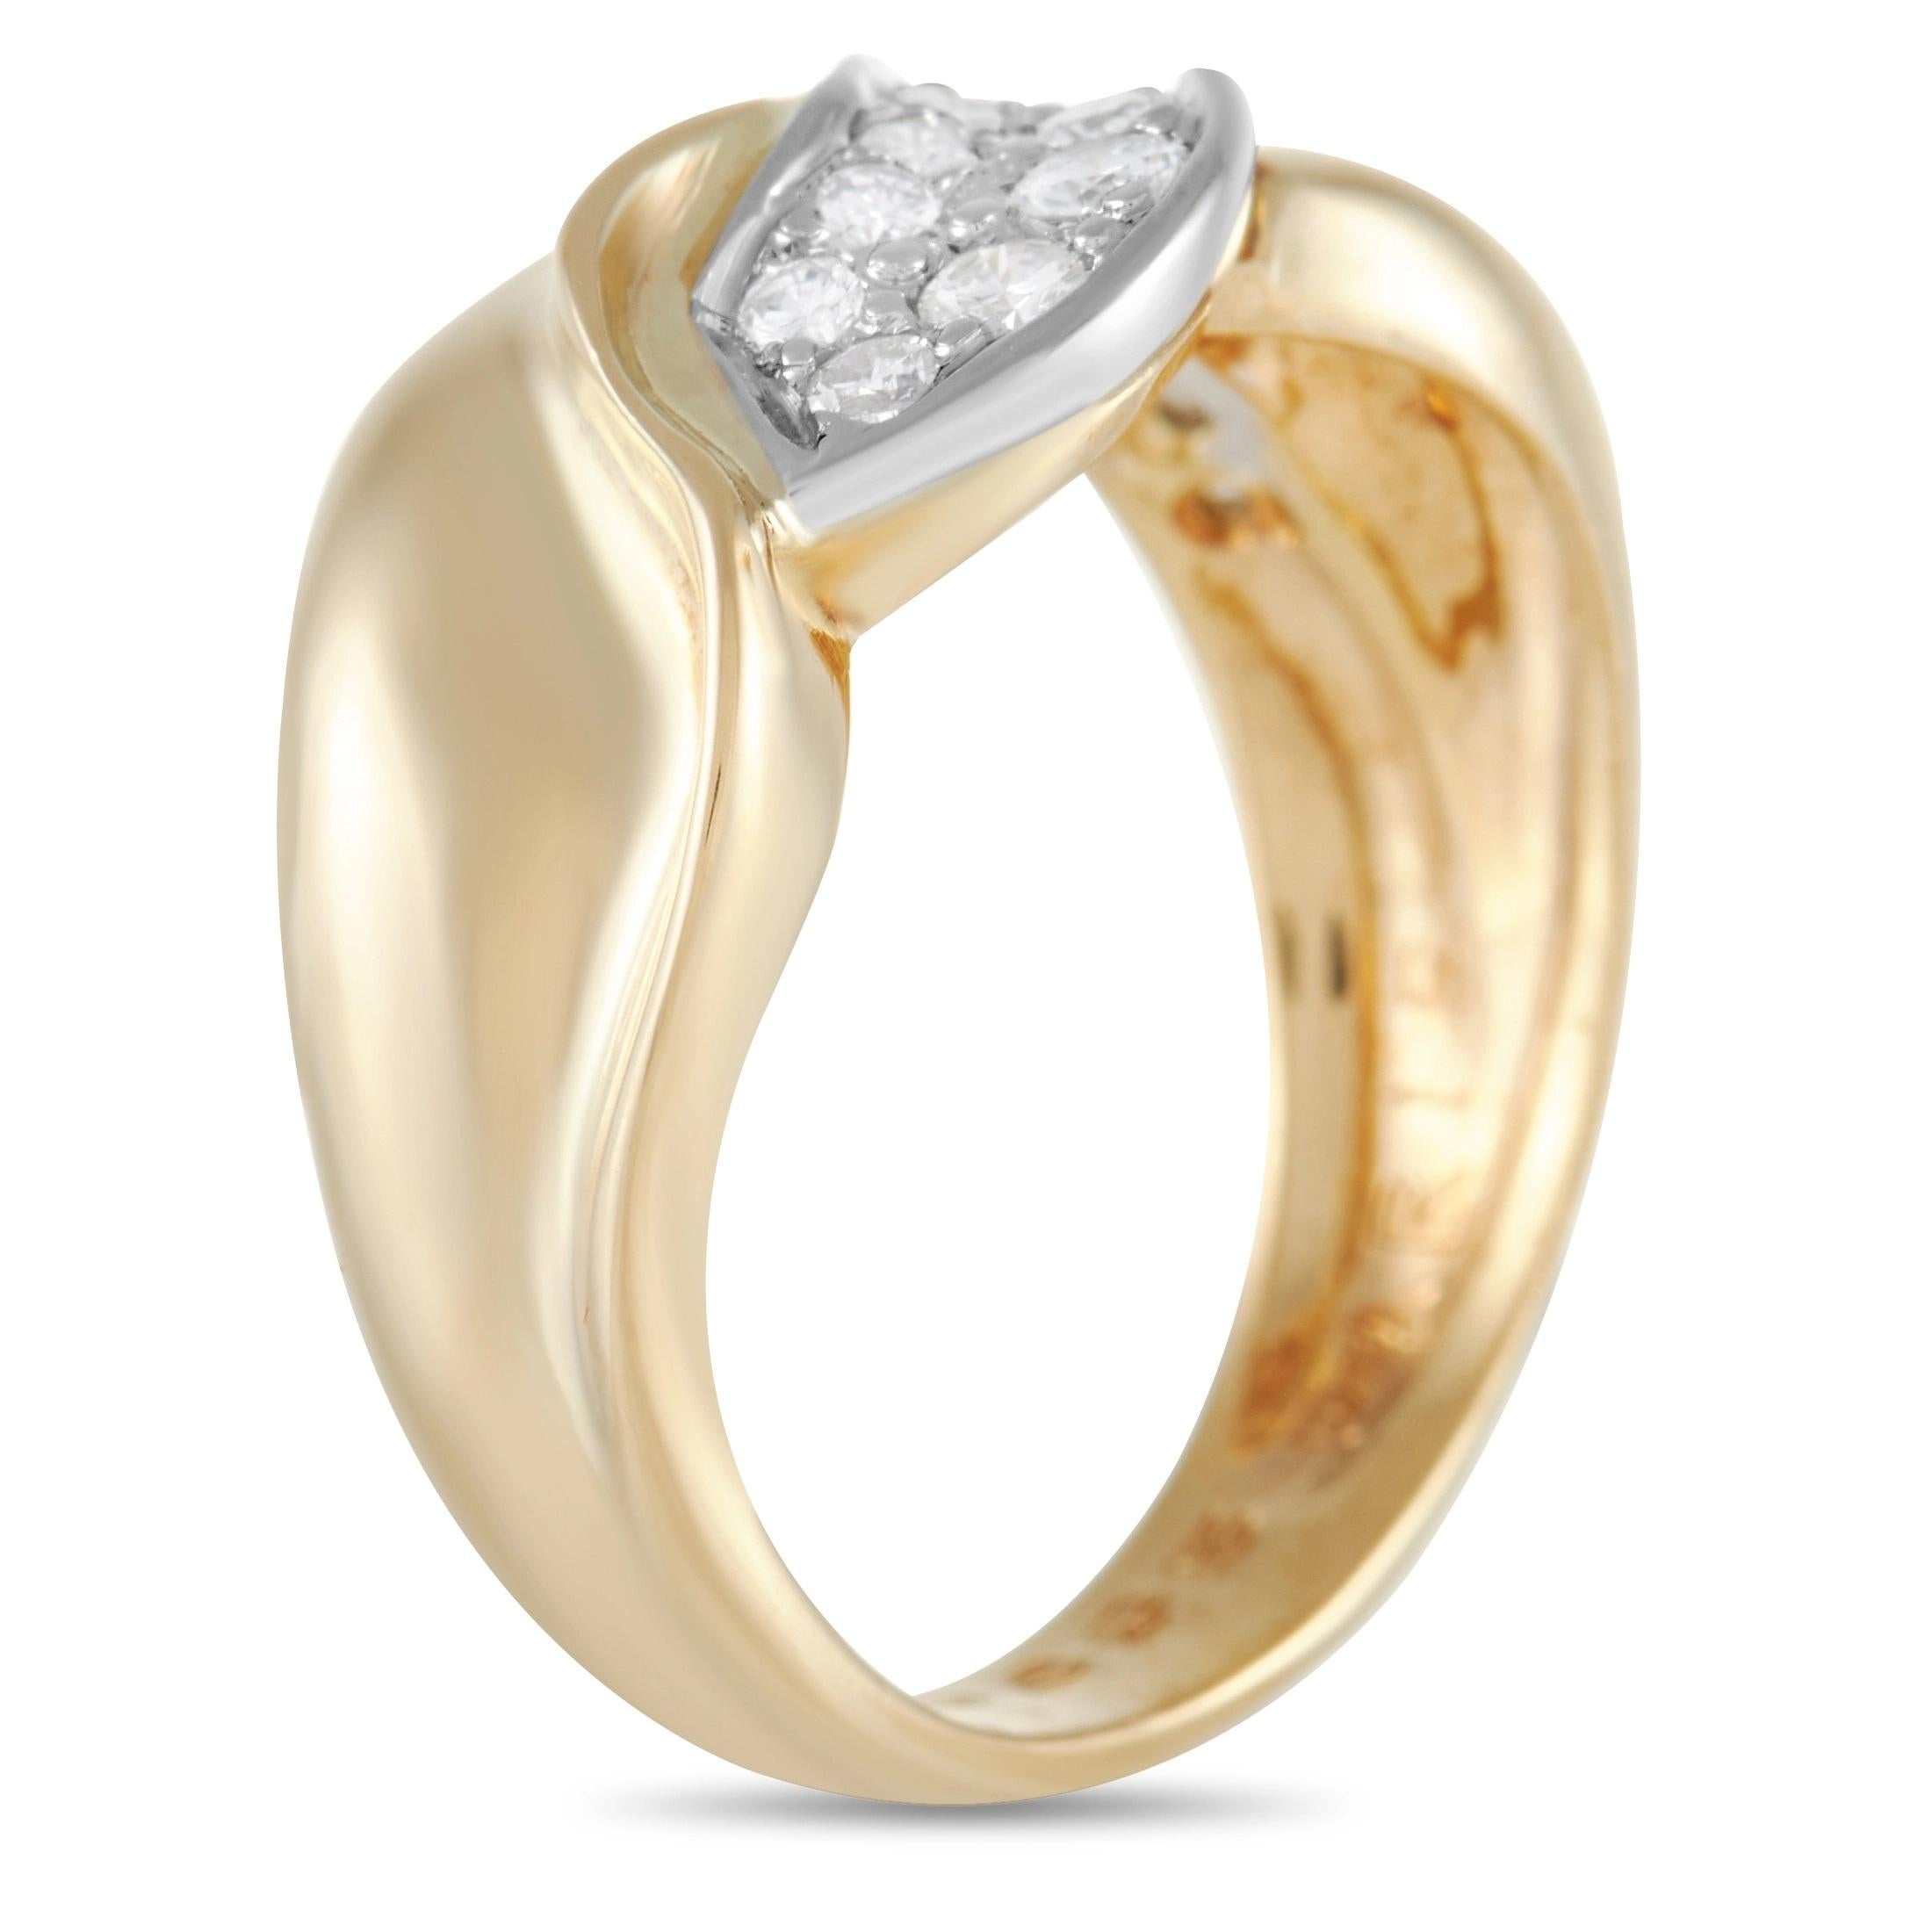 Instantly enhance your luxury and sophistication with this exceptional Chaumet cocktail ring. A piece that will always command attention, it features a gracefully curved 18K Yellow Gold band that measures 5mm wide. At the center, an array of